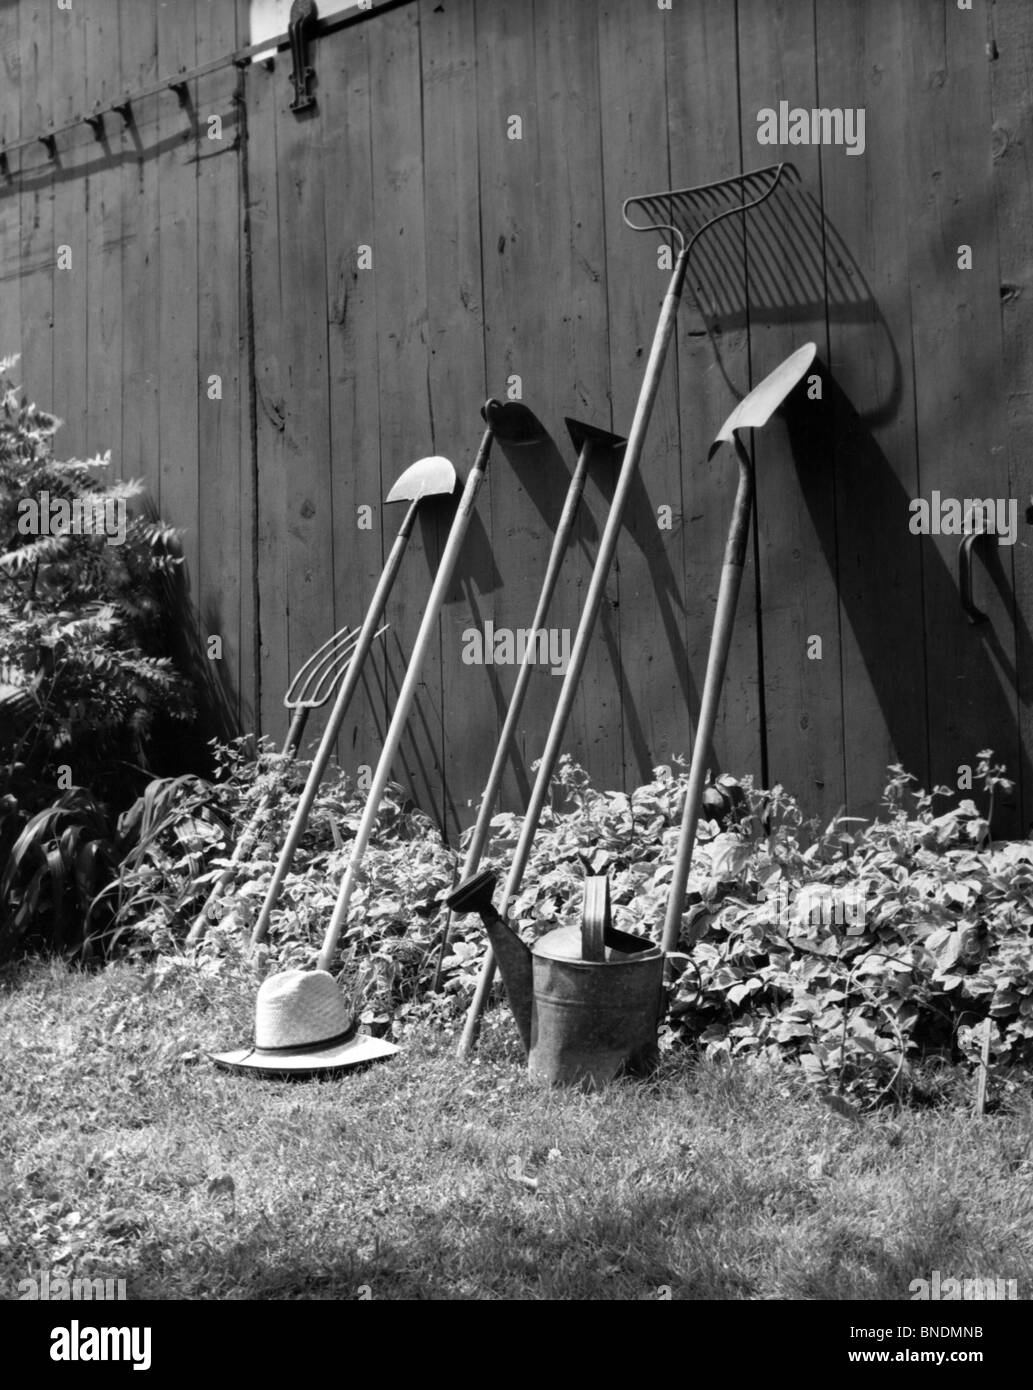 Gardening equipment leaning against a wall Stock Photo